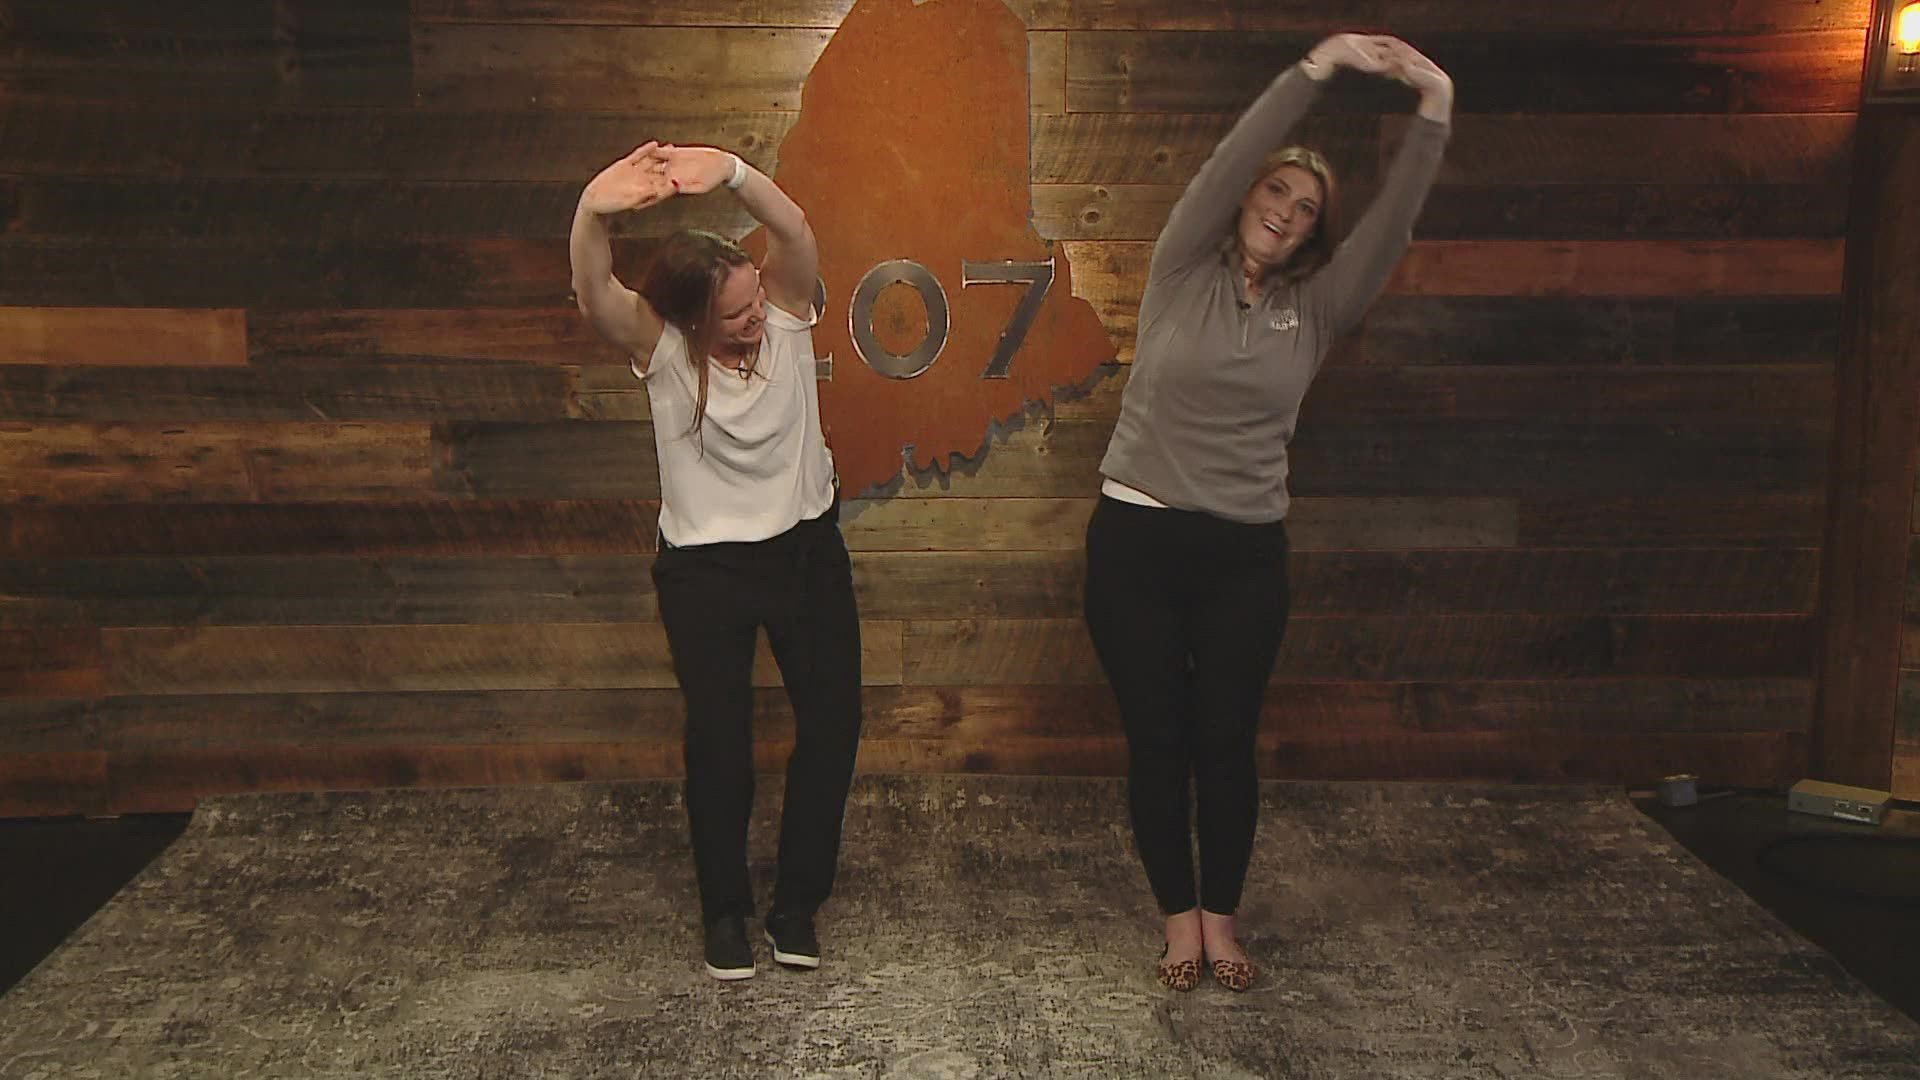 Dr. Allyson Coffin joins us with some easy-to-do stretches that will have you feeling better throughout the day.